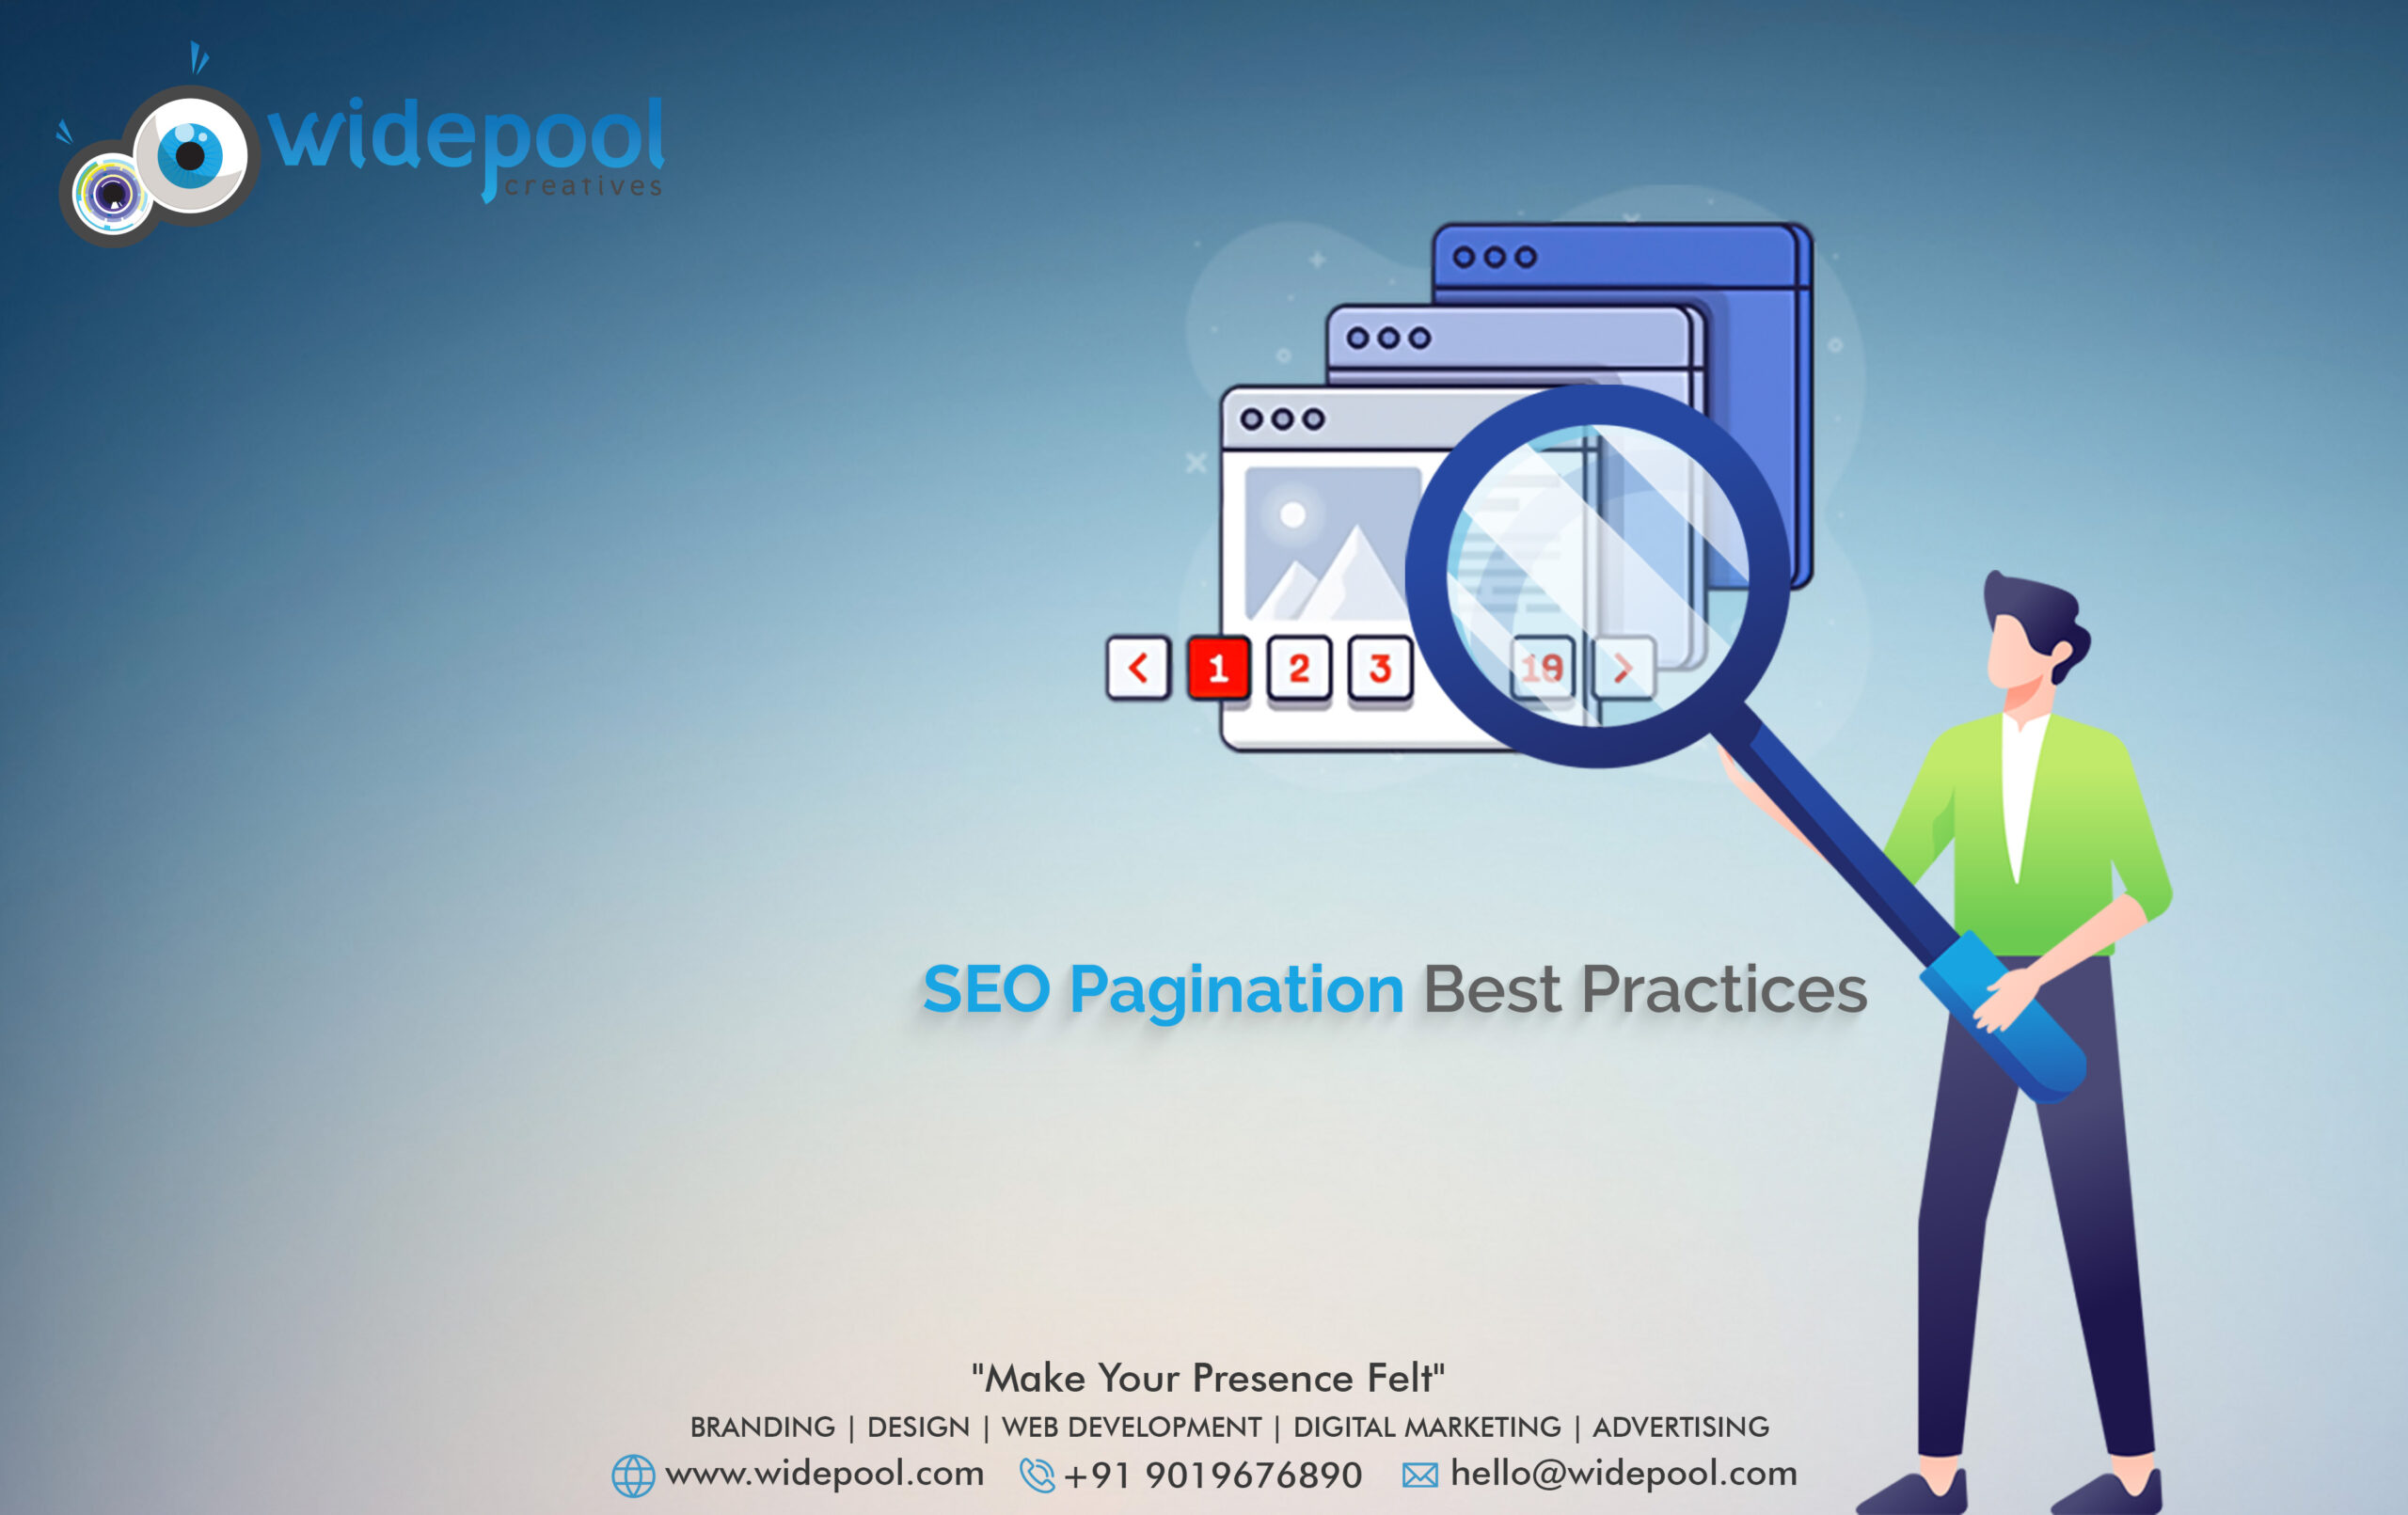 SEO Pagination Best Practices